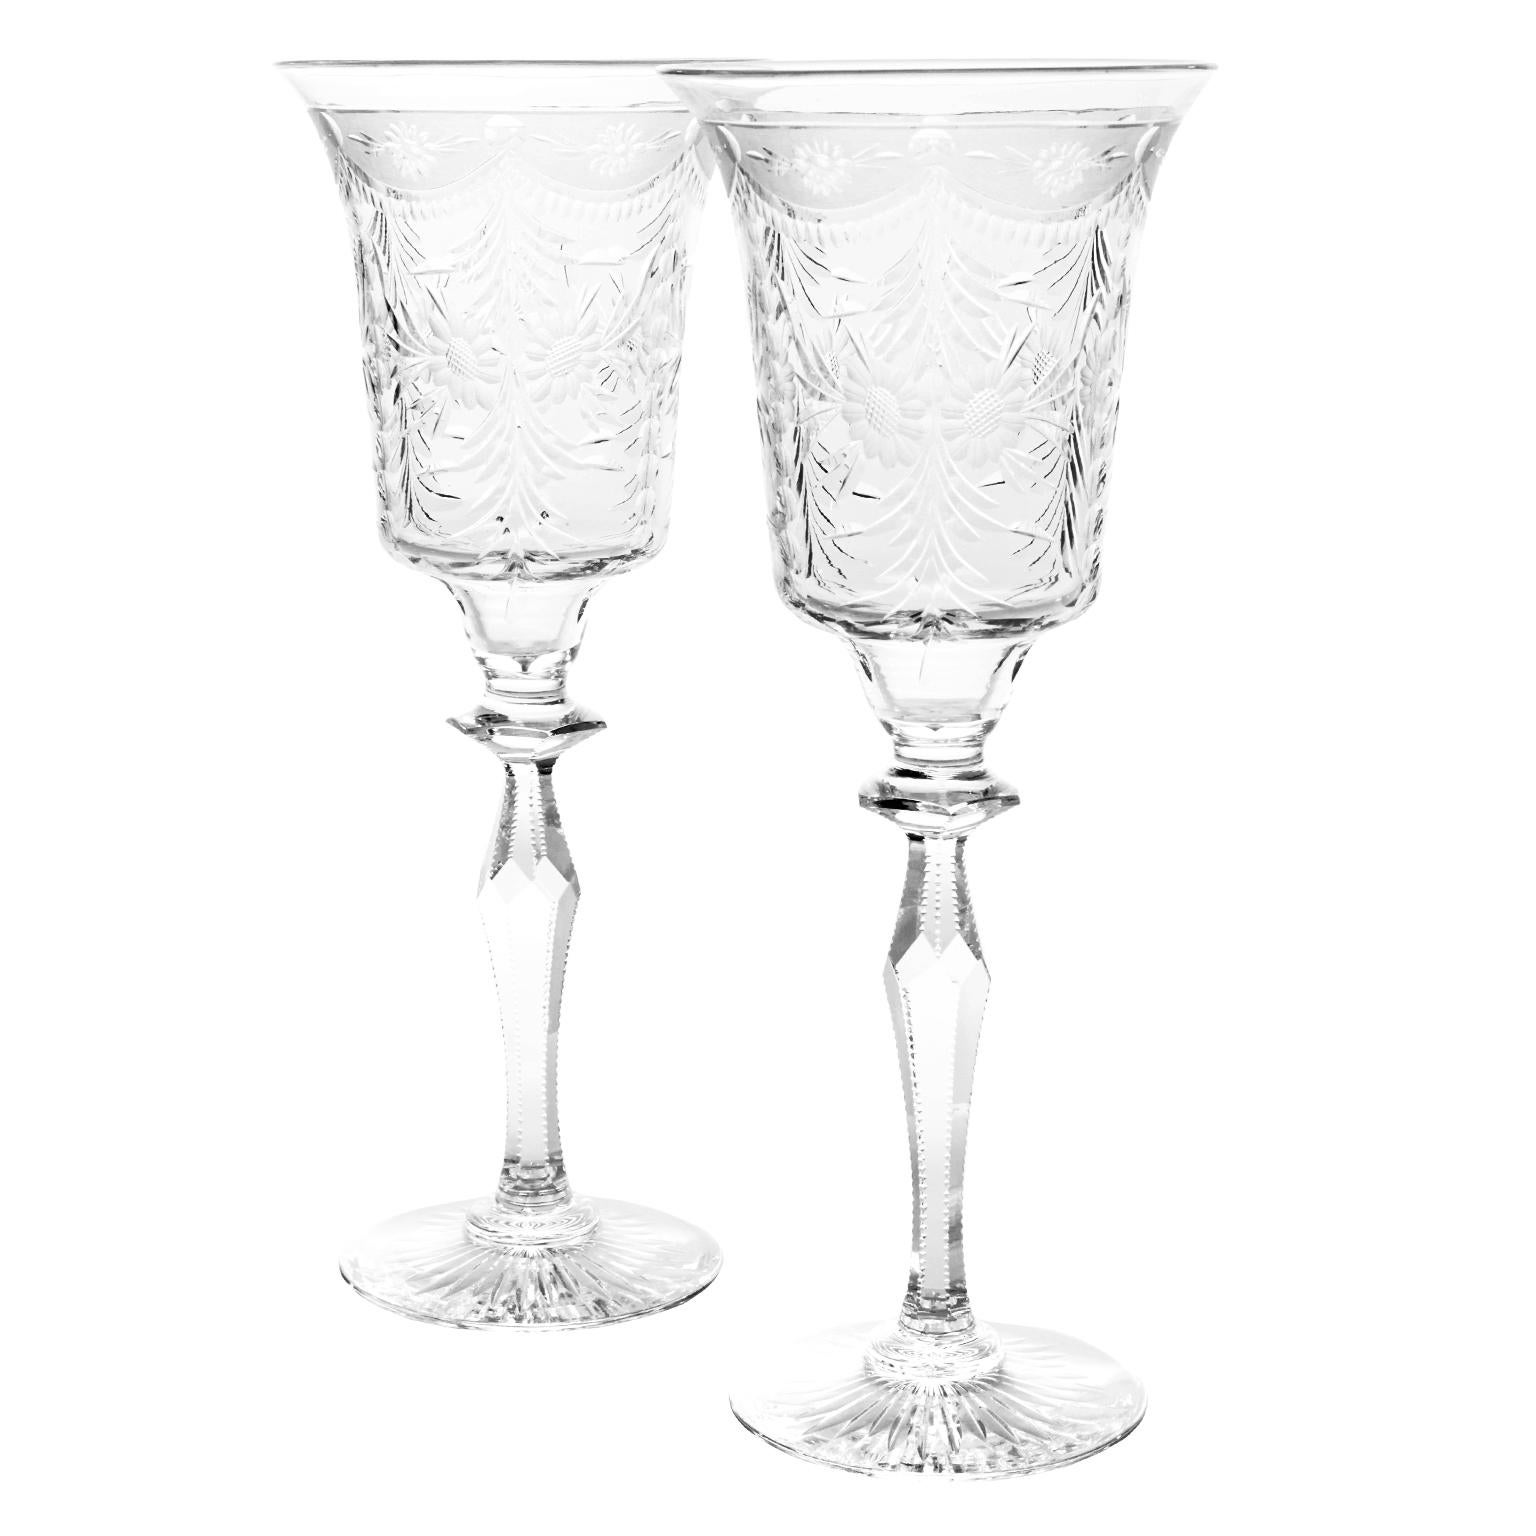 12 Pairpoint Very Tall Water Goblets, Wickham Pattern In Excellent Condition For Sale In Litchfield, CT